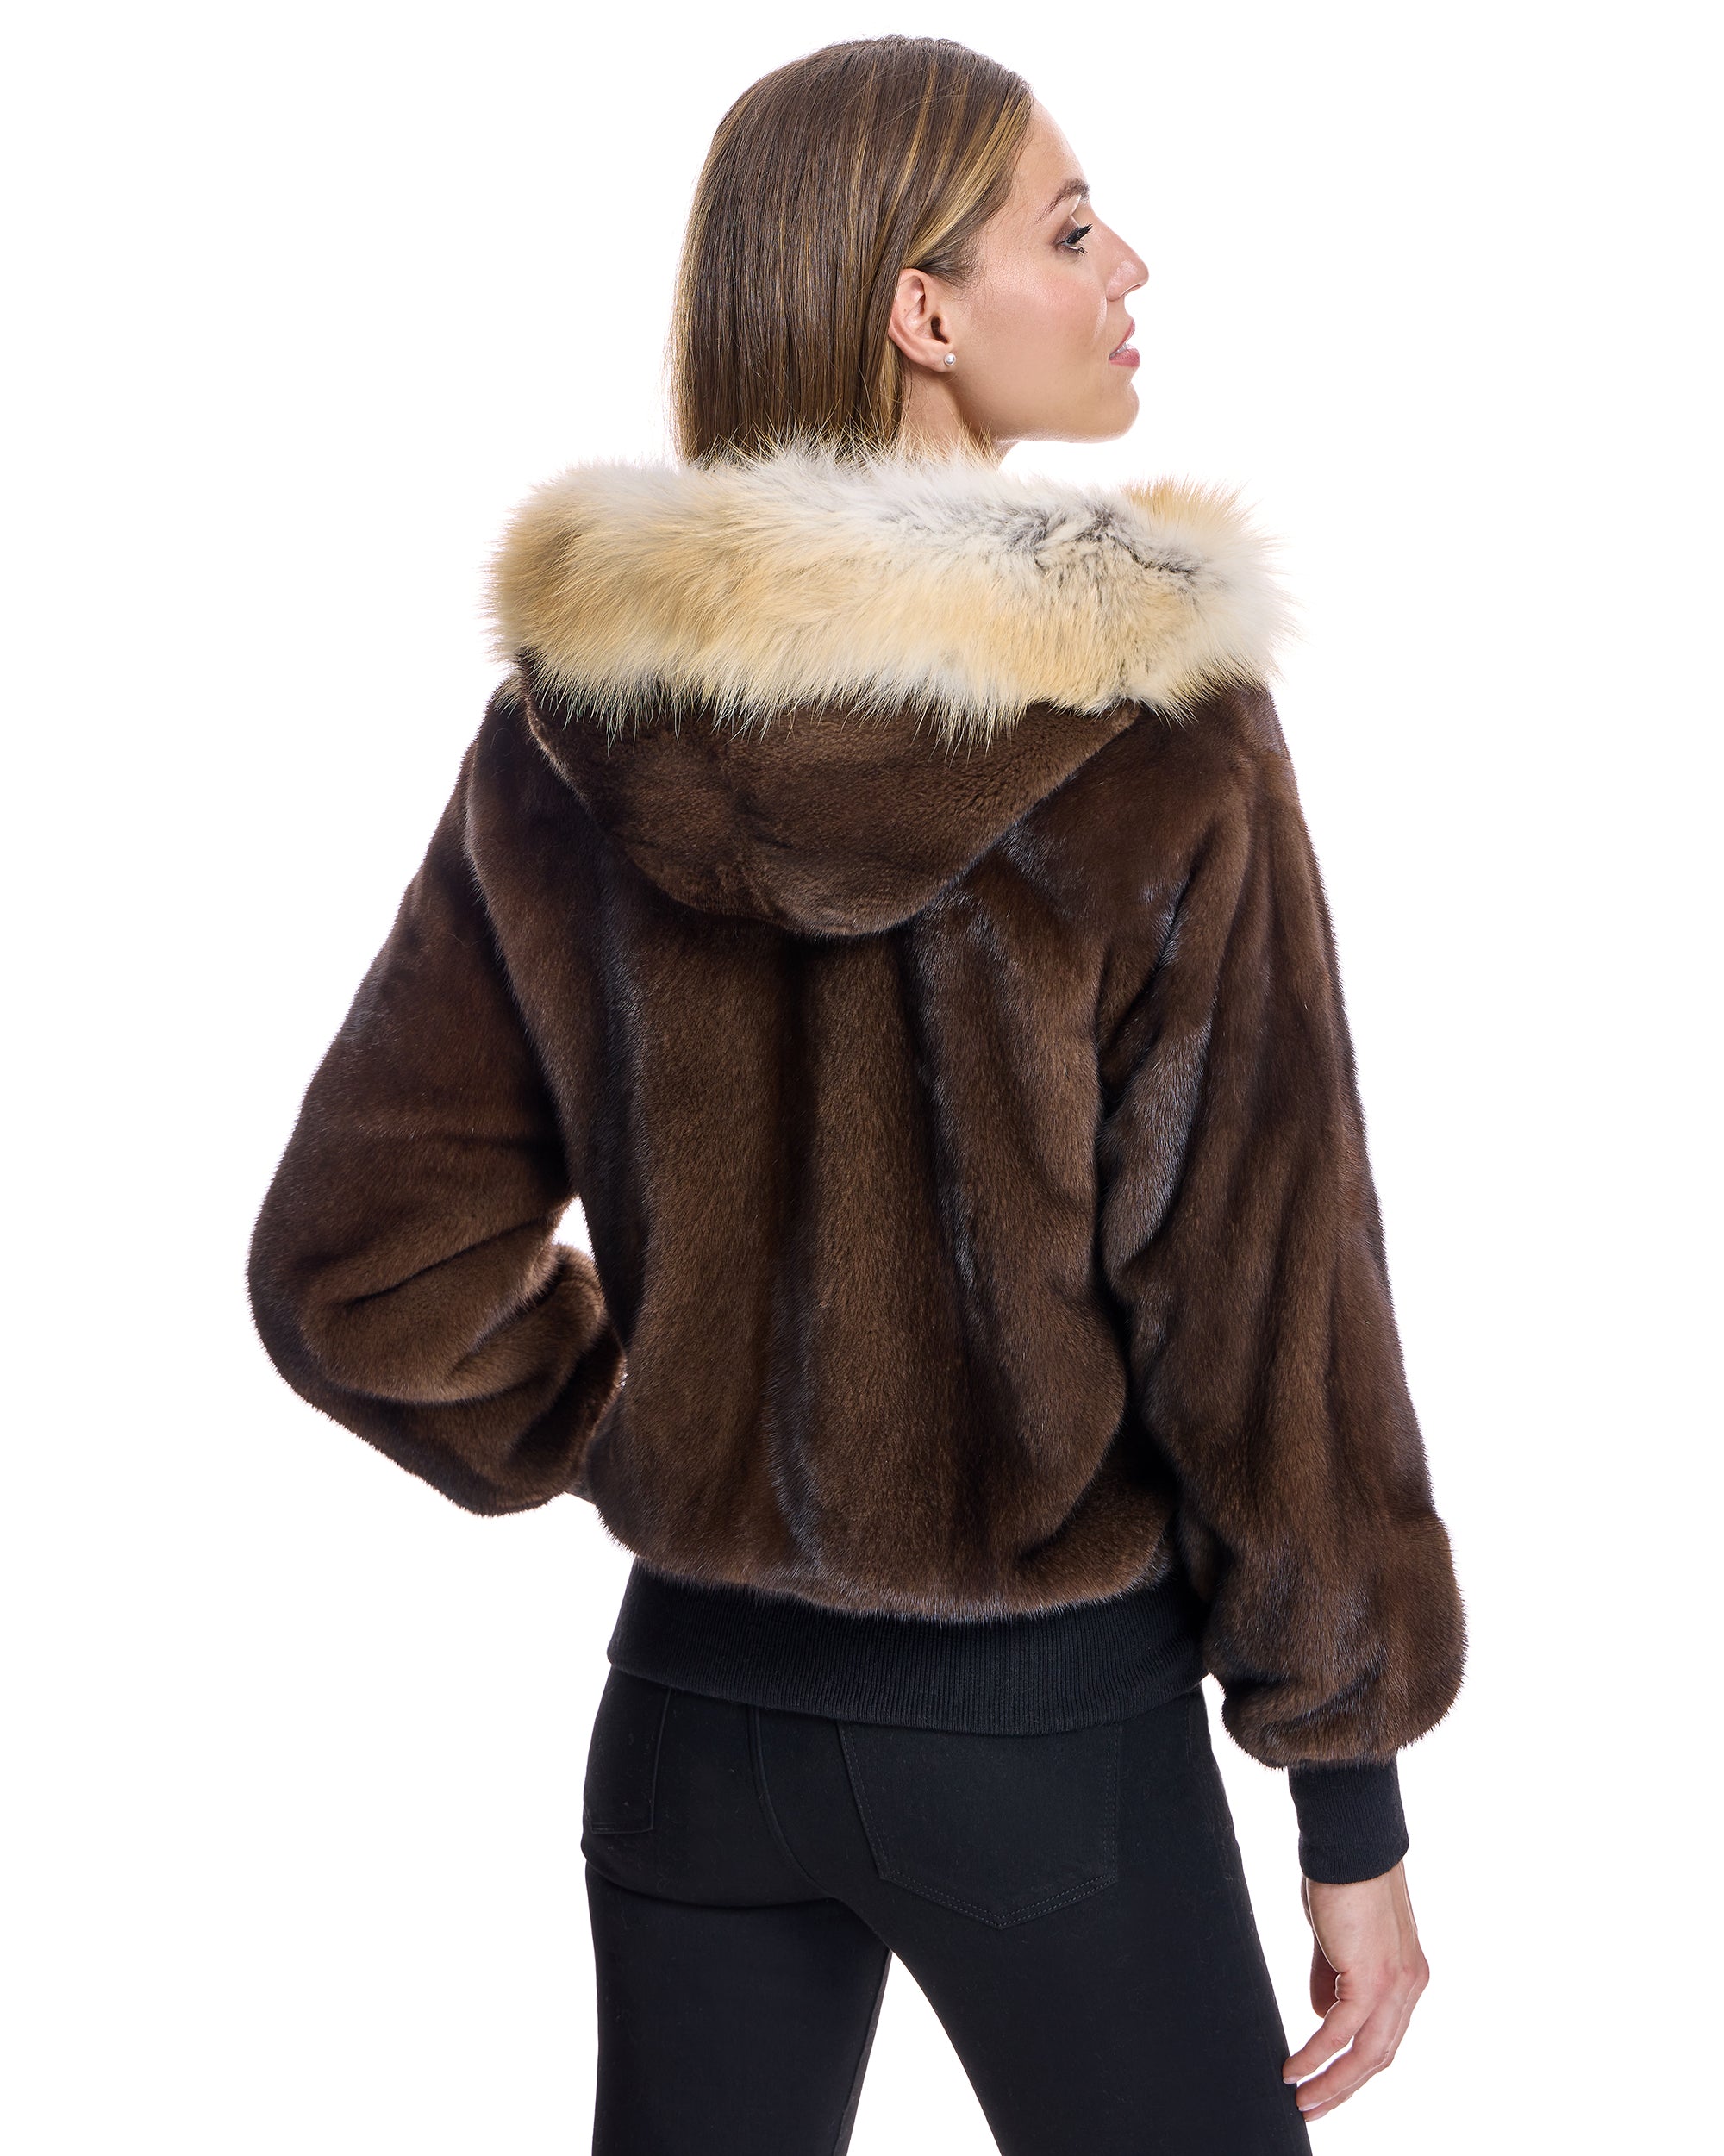 Reversible Mink Jacket with Fox Trimmed Hood